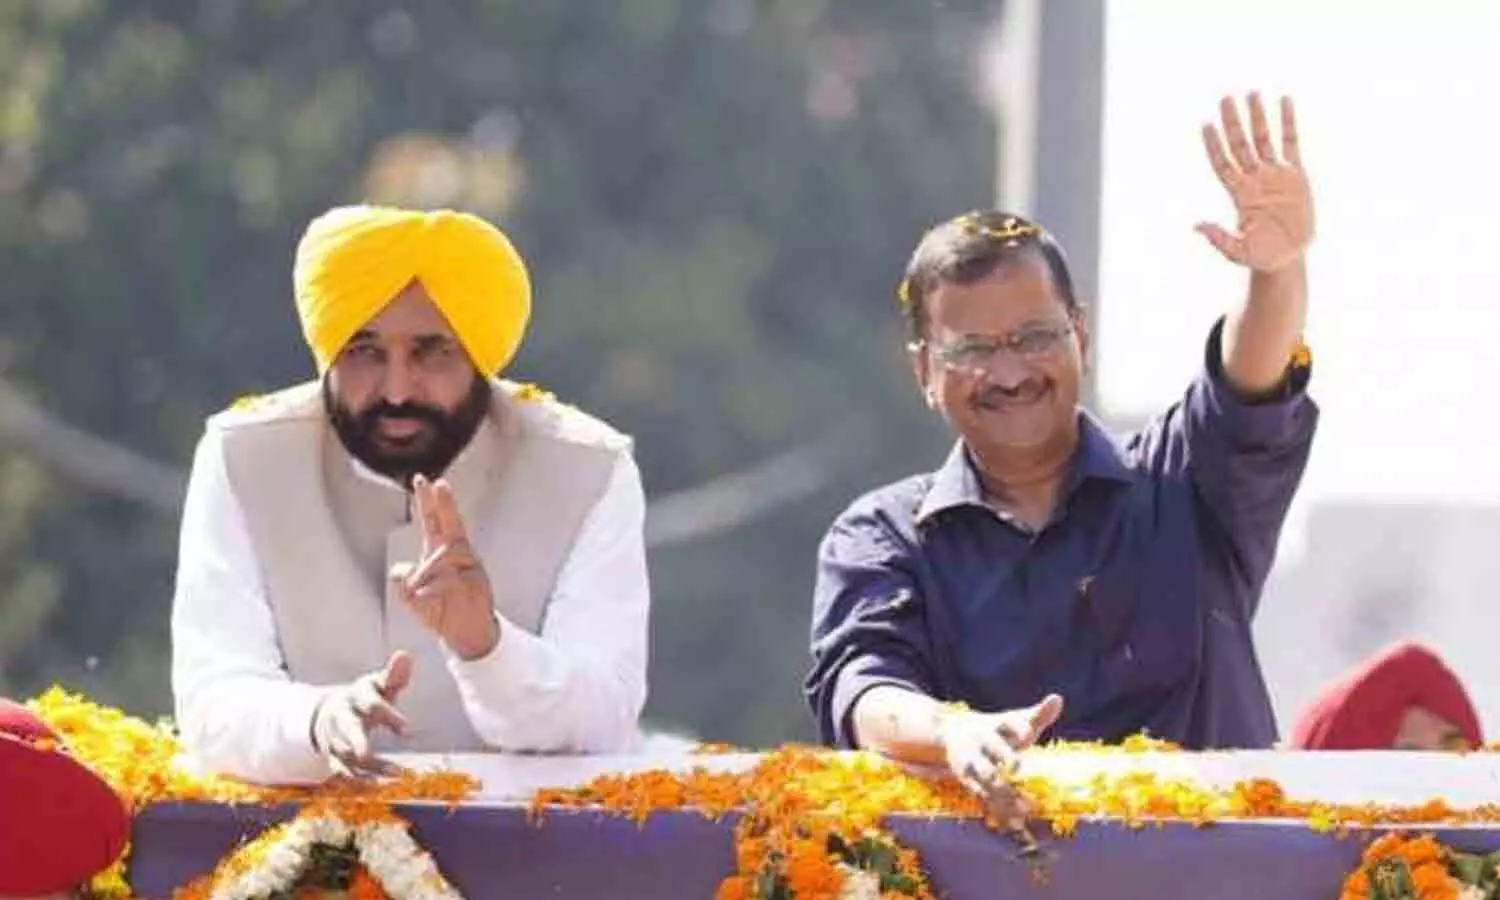 Punjab: On March 16, every child of Punjab will become the Chief Minister, Delhi CM Kejriwal said in the road show